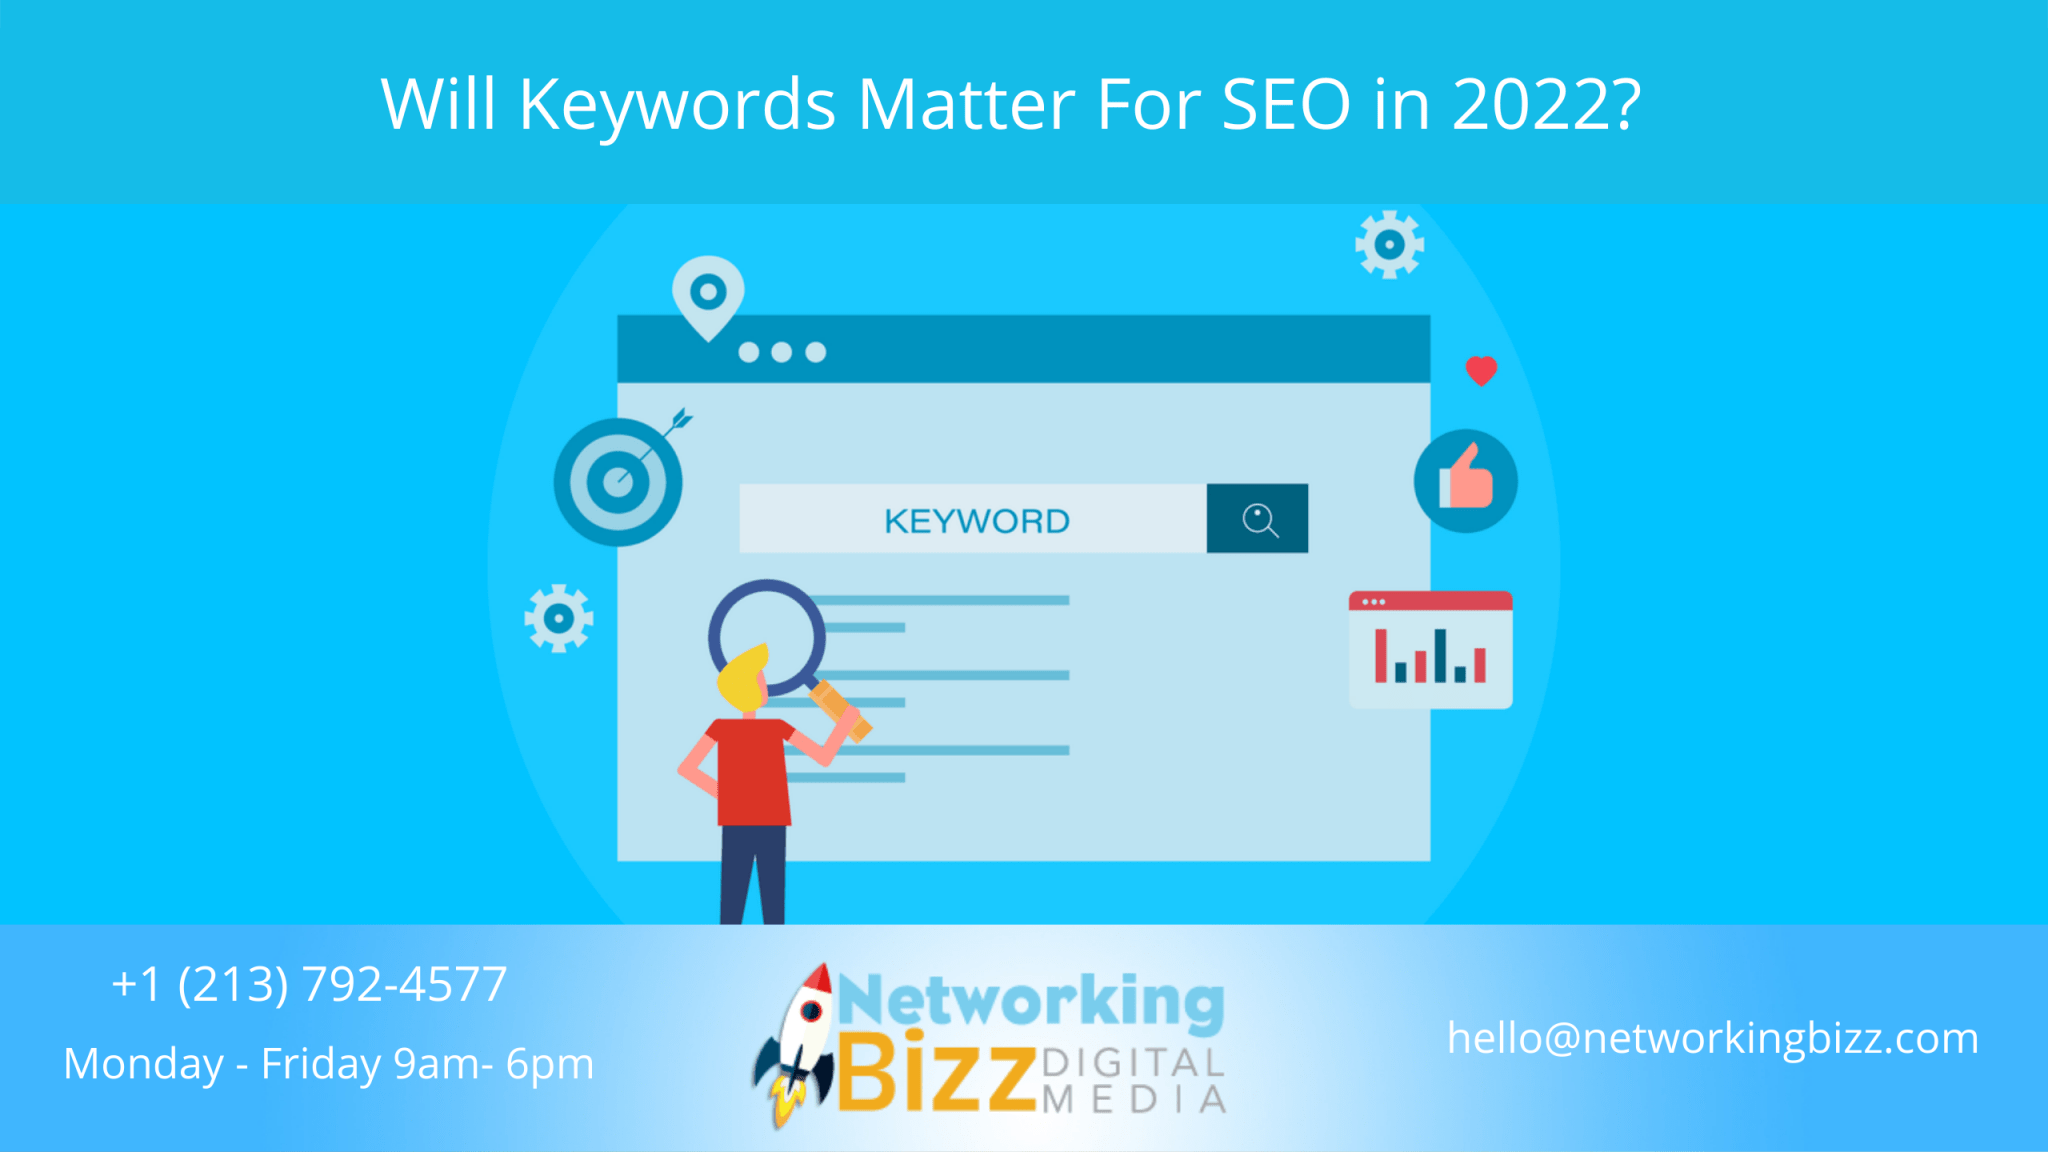 Will Keywords Matter For SEO in 2022?